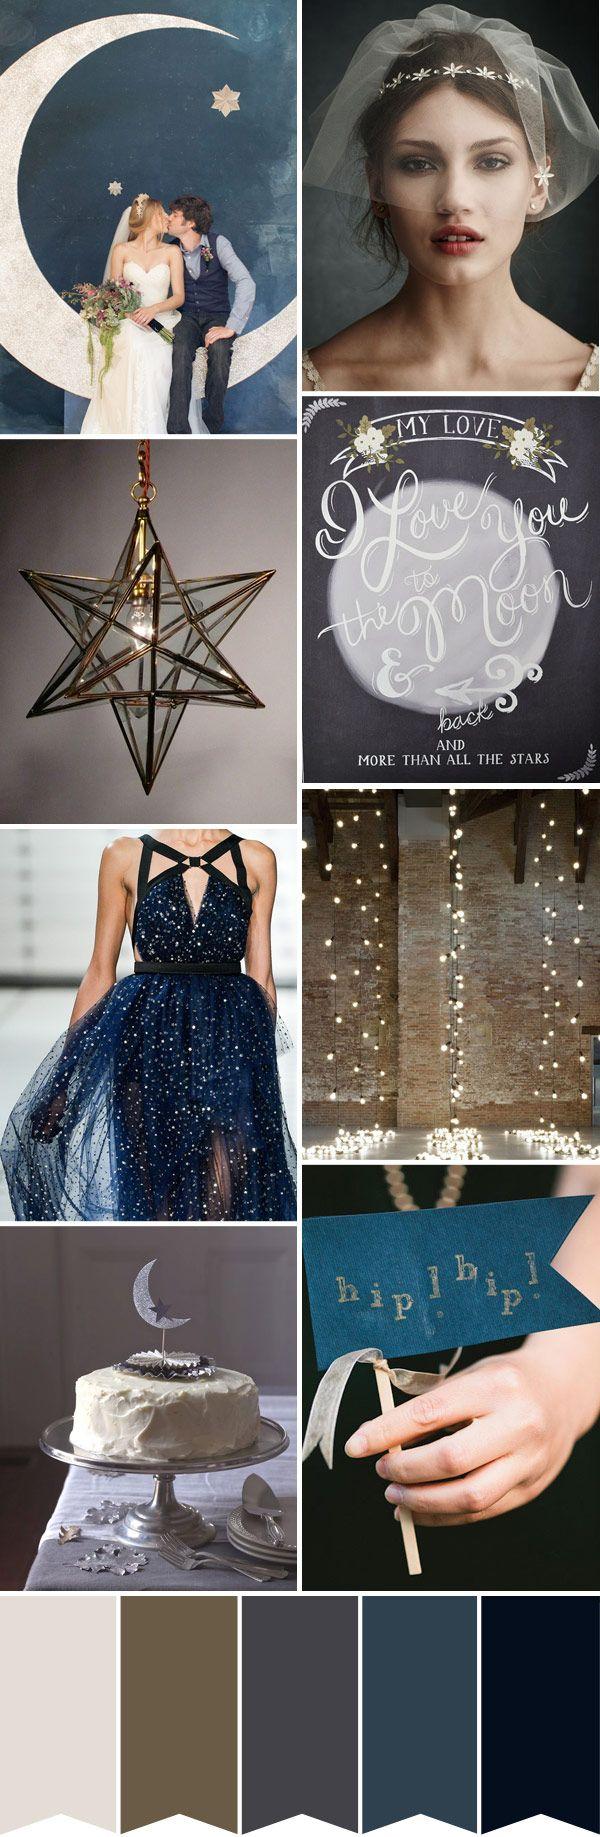 Wedding - I Love You To The Moon And Back - Starry Night Wedding Inspiration